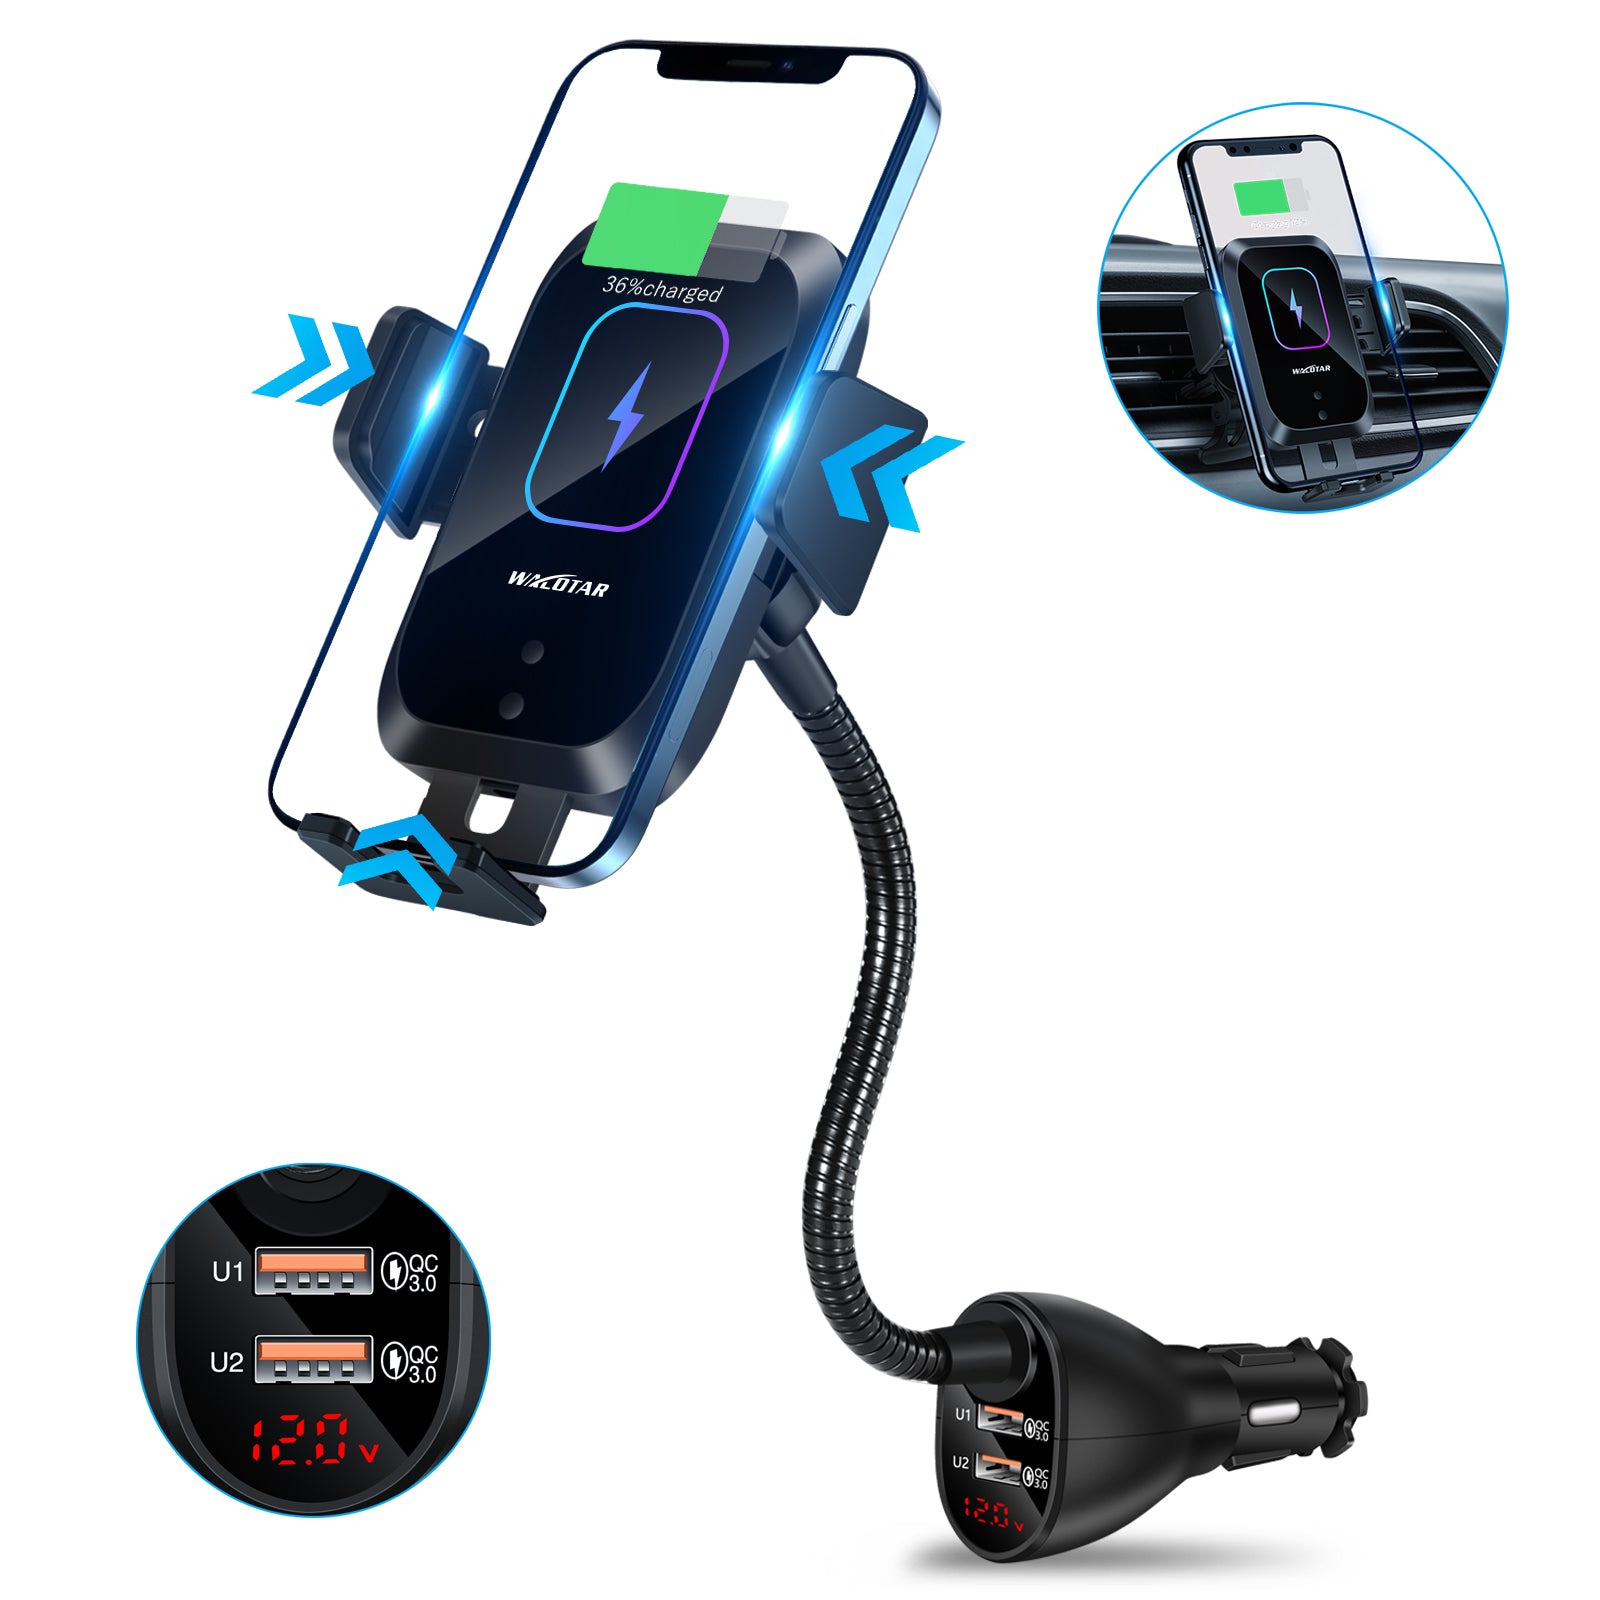 HVDI Wireless Car Charger Mount,Car Cigarette Lighter 15W Qi Fast Charging Auto-Clamping Dual QC 3.0 Port Air Vent Car Charger Phone Holder,for iPhone 12 Pro Max/11 Pro Max/XR/X/8,Samsung S20/S10/9/8